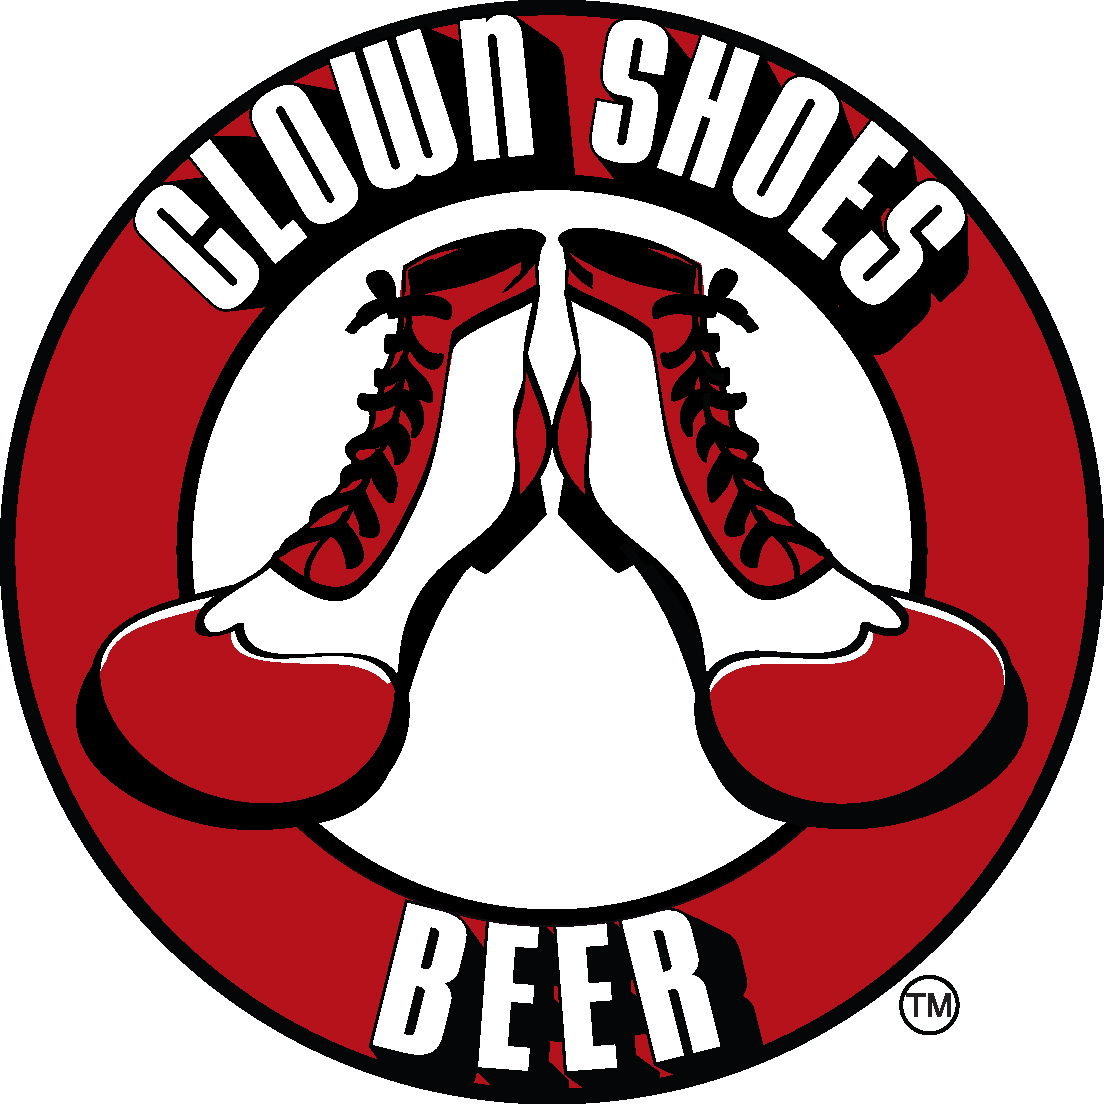 CLOWN SHOES BEER